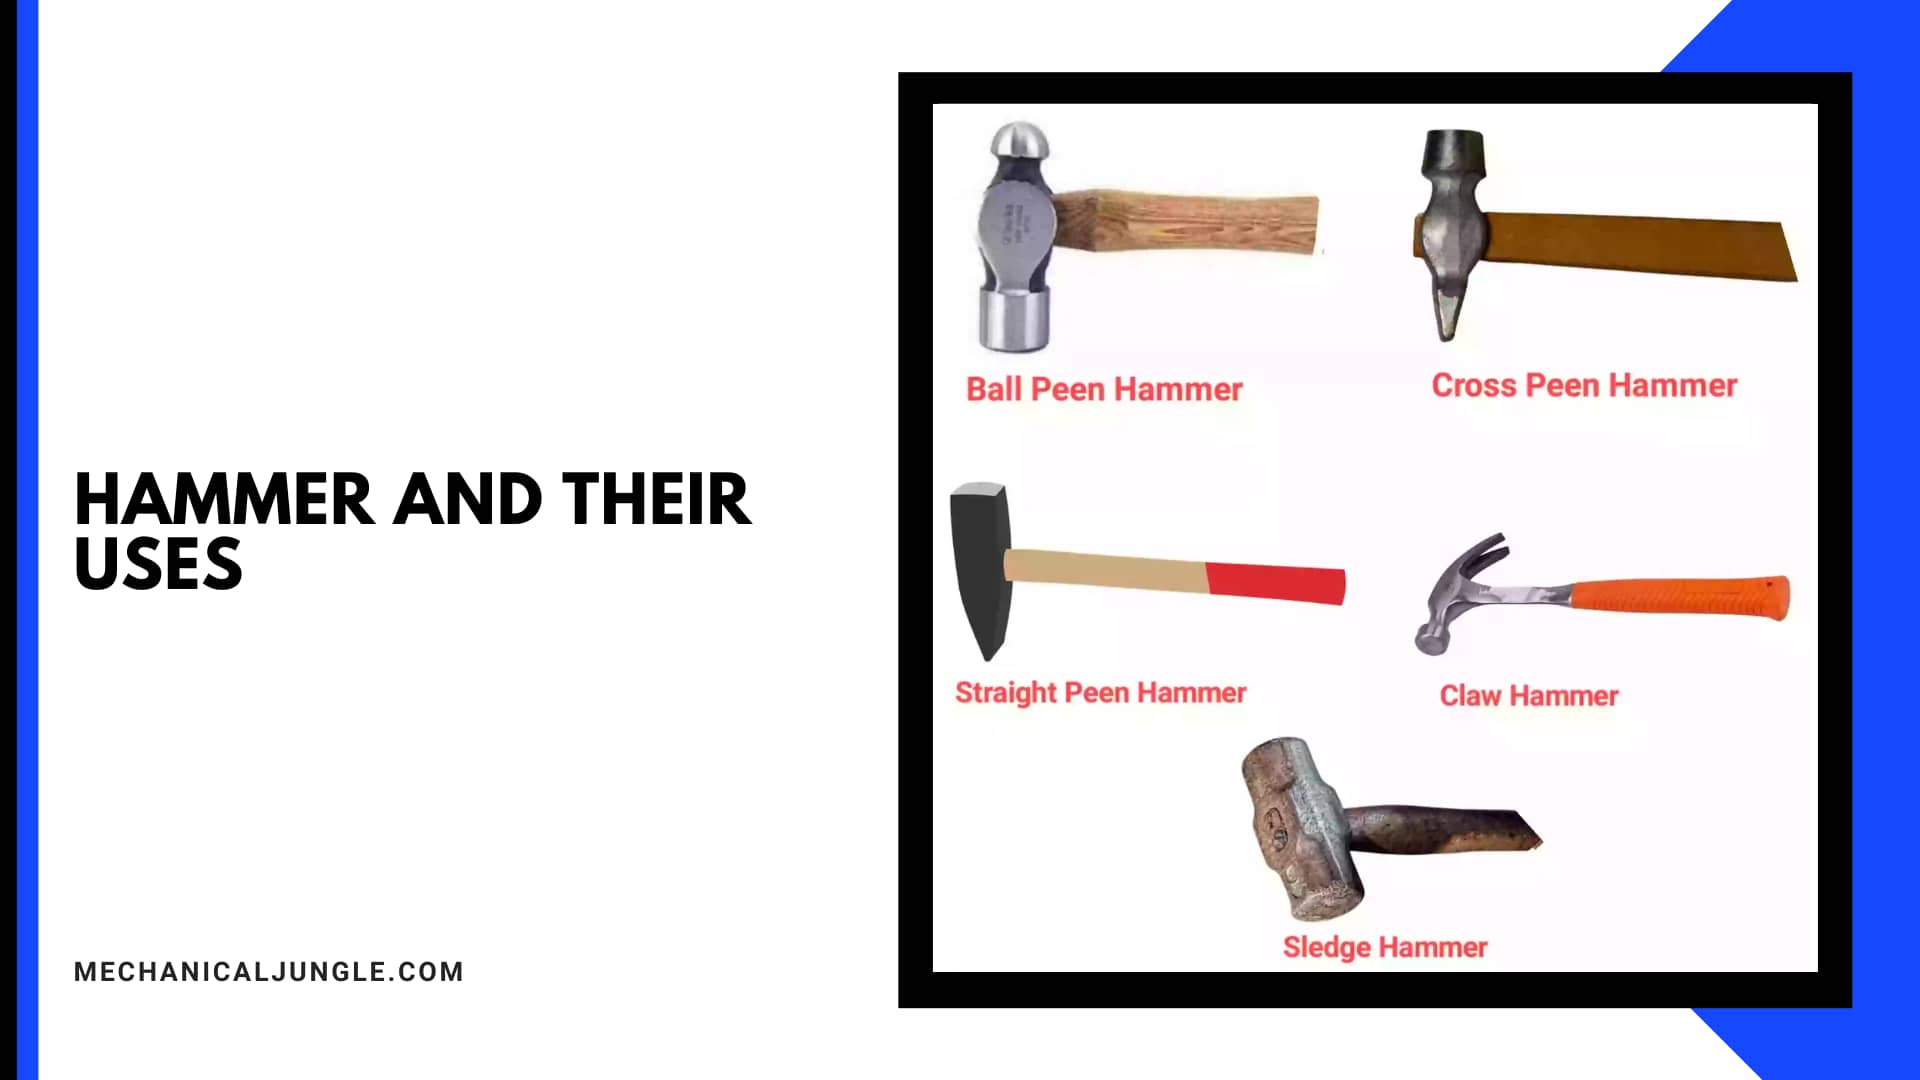 Hammer and Their Uses